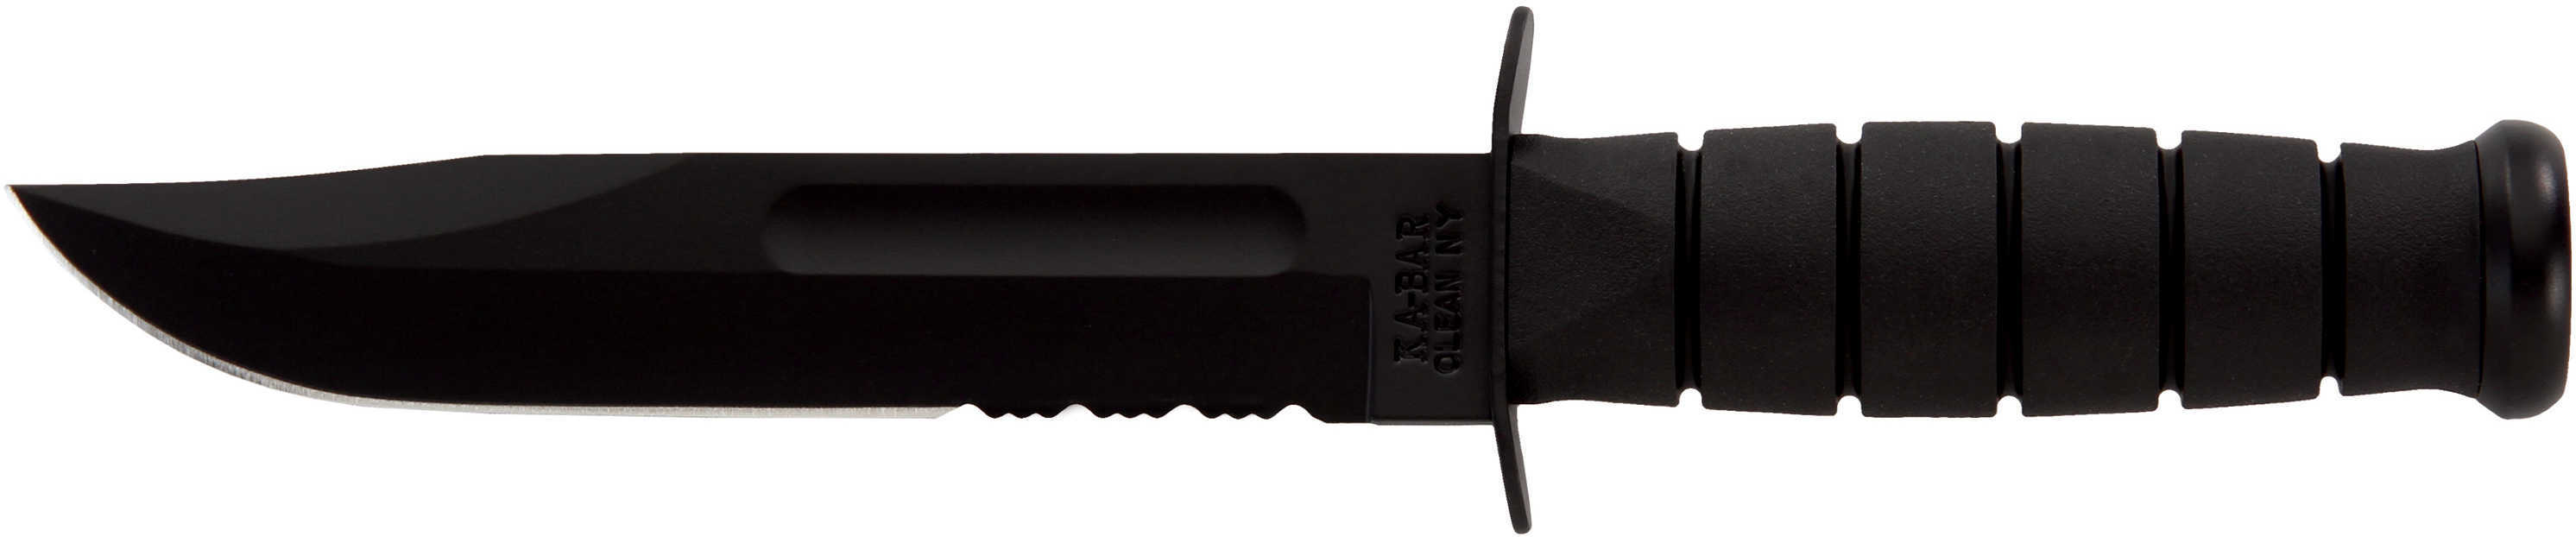 Kabar Fighting/Utility Knife With Serrated Edge & Kraton G Handle Md: 1214